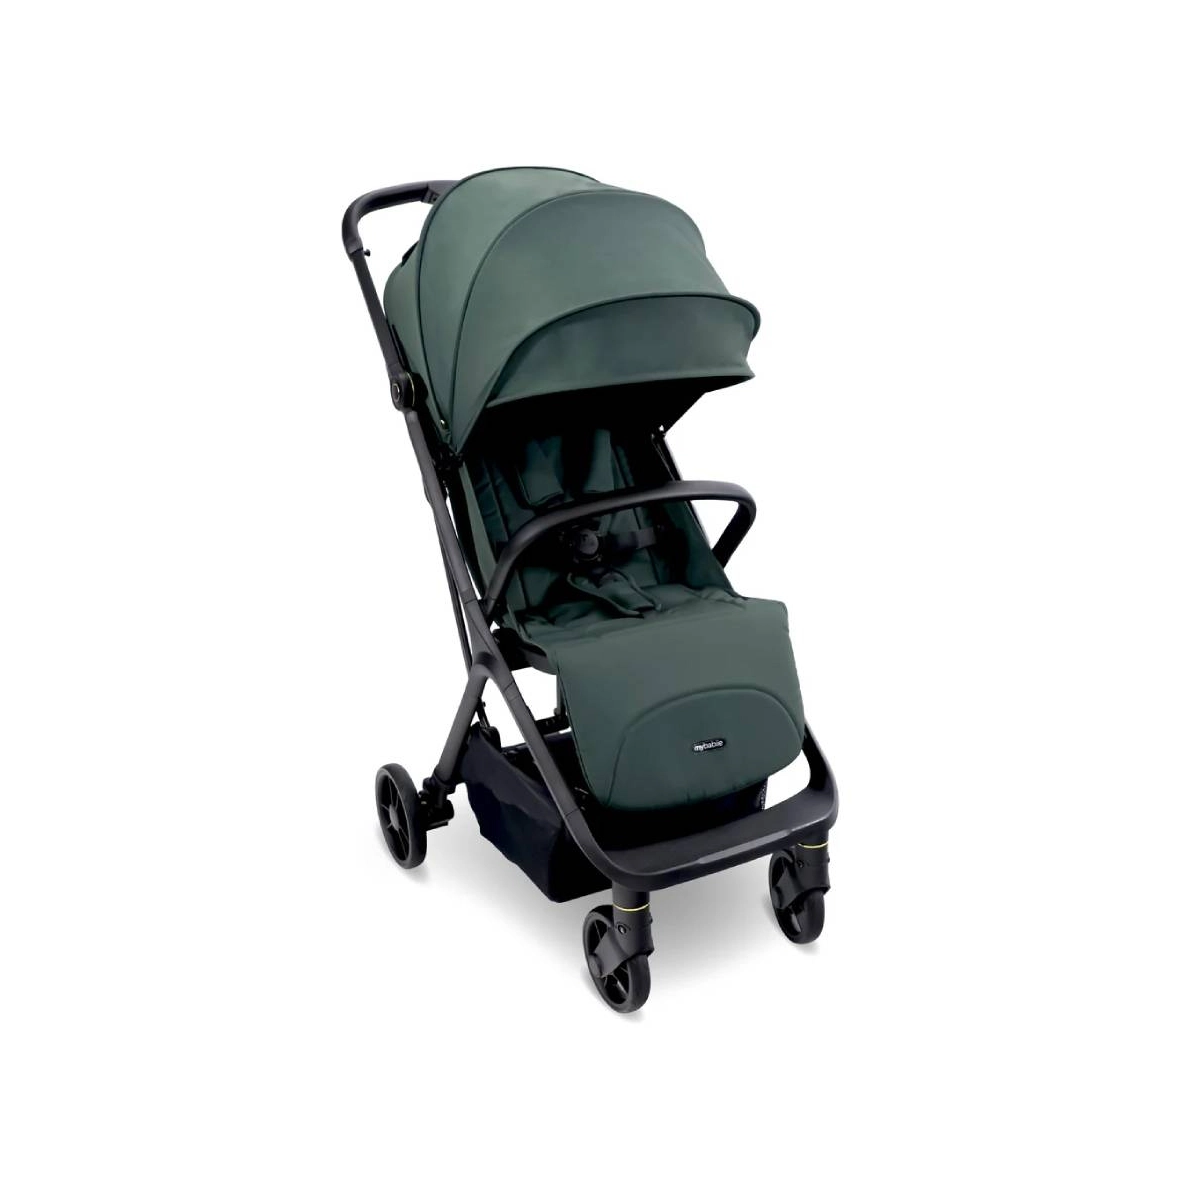 My Babiie MBX7 Auto Fold Compact Stroller